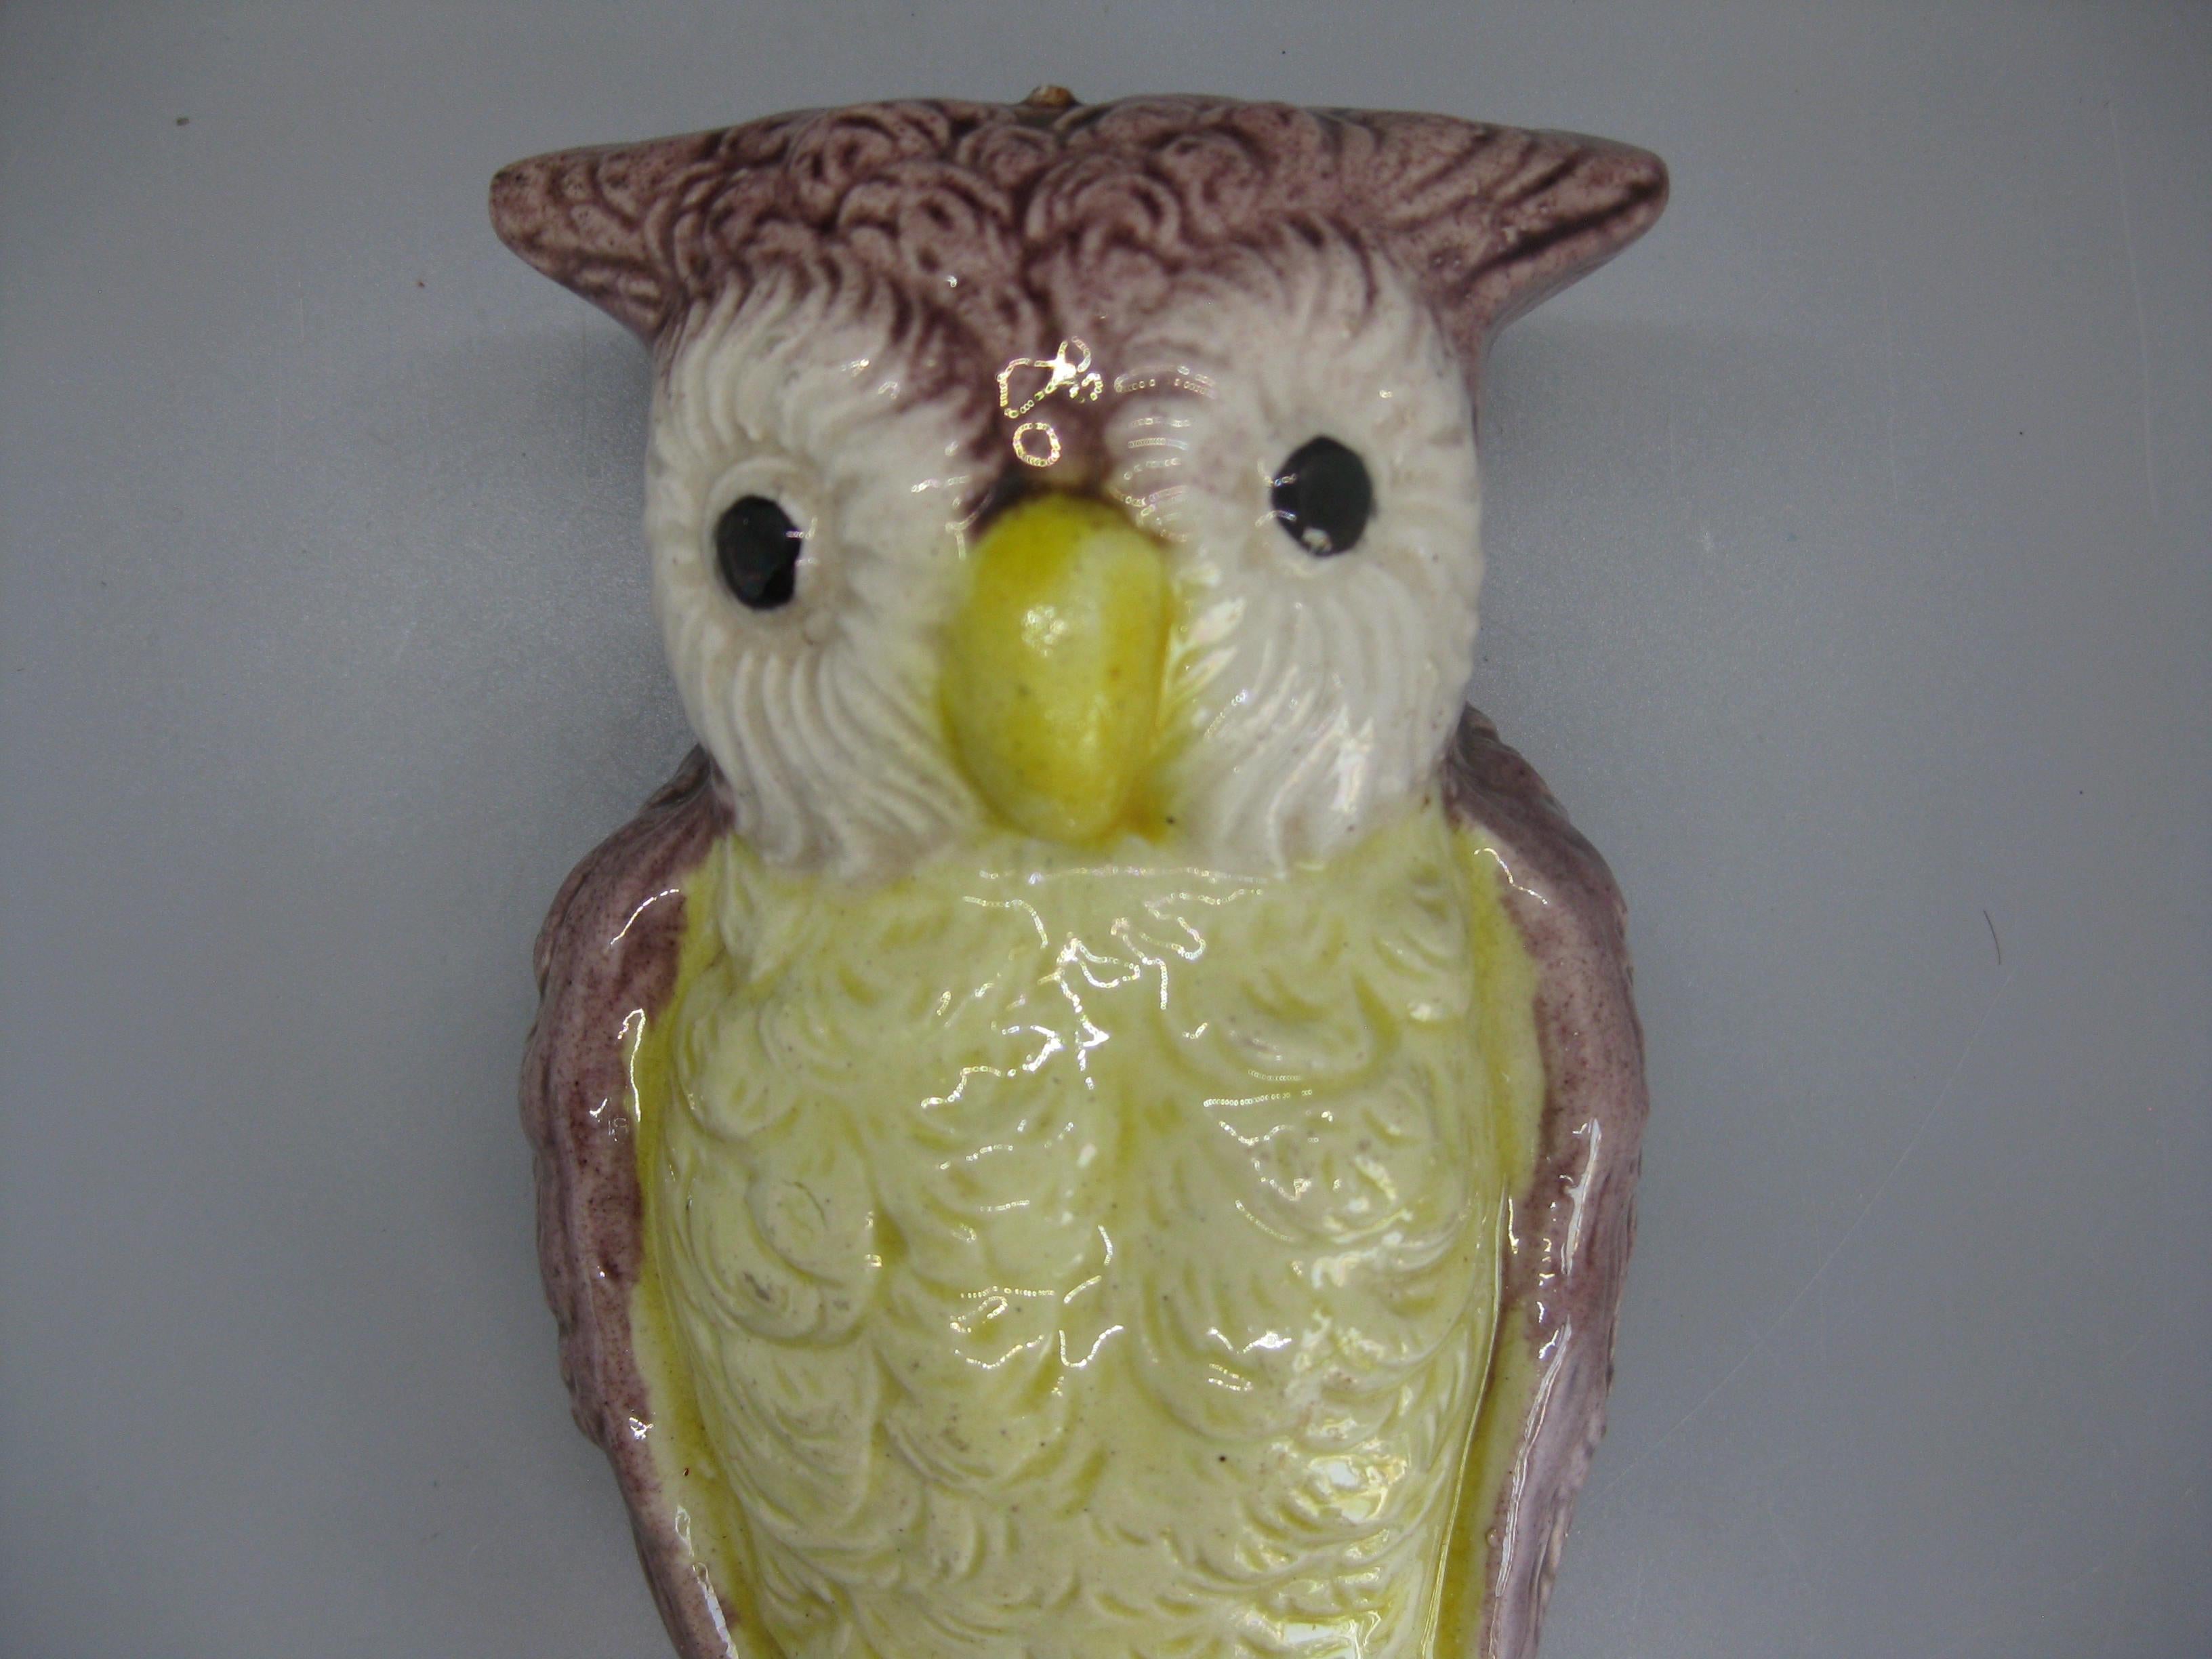 We are offering a beautiful Japanese porcelain figural owl wall pocket vase dating from the Meiji Period. Great details and form. This would have mounted onto a wall. Marked on the back 